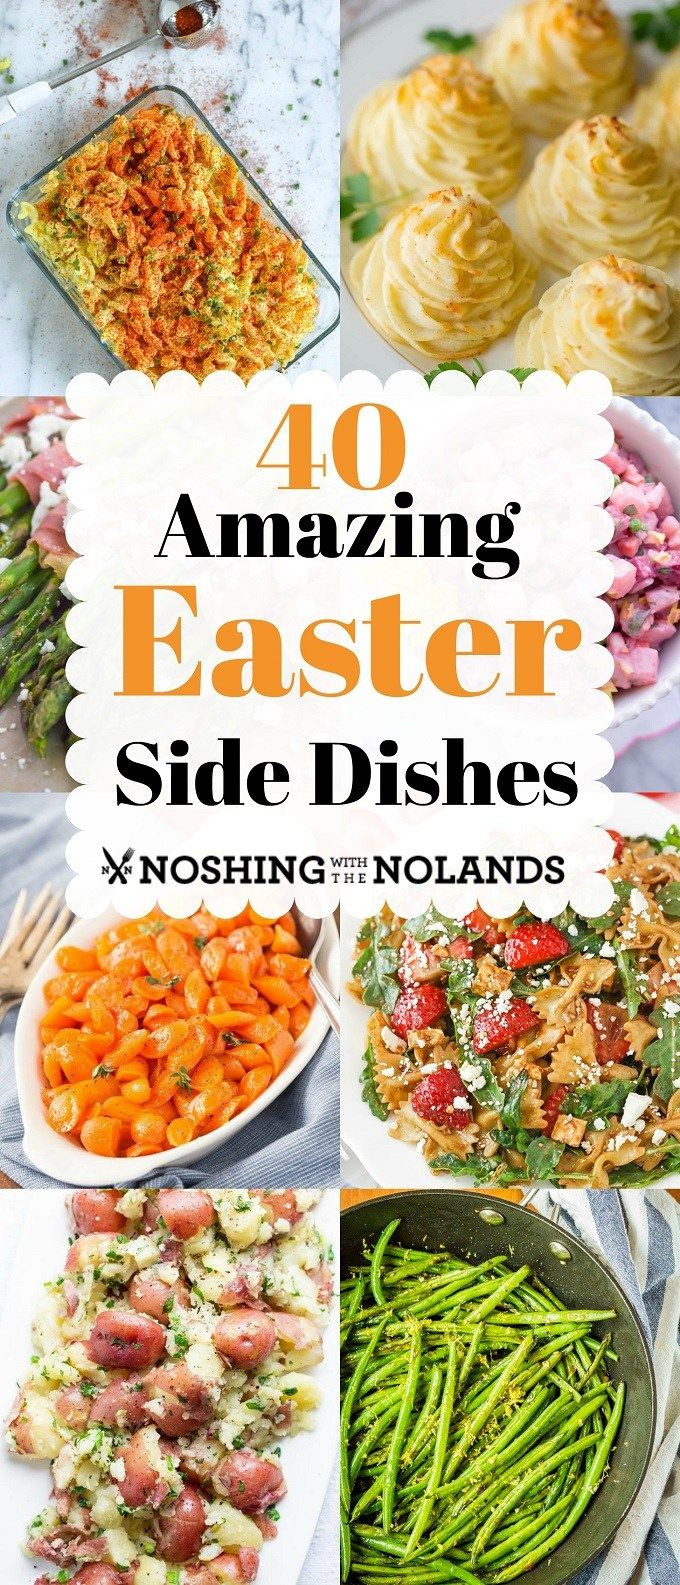 Easter Side Dishes Pinterest
 40 Amazing Easter side dishes to make your Easter dinner